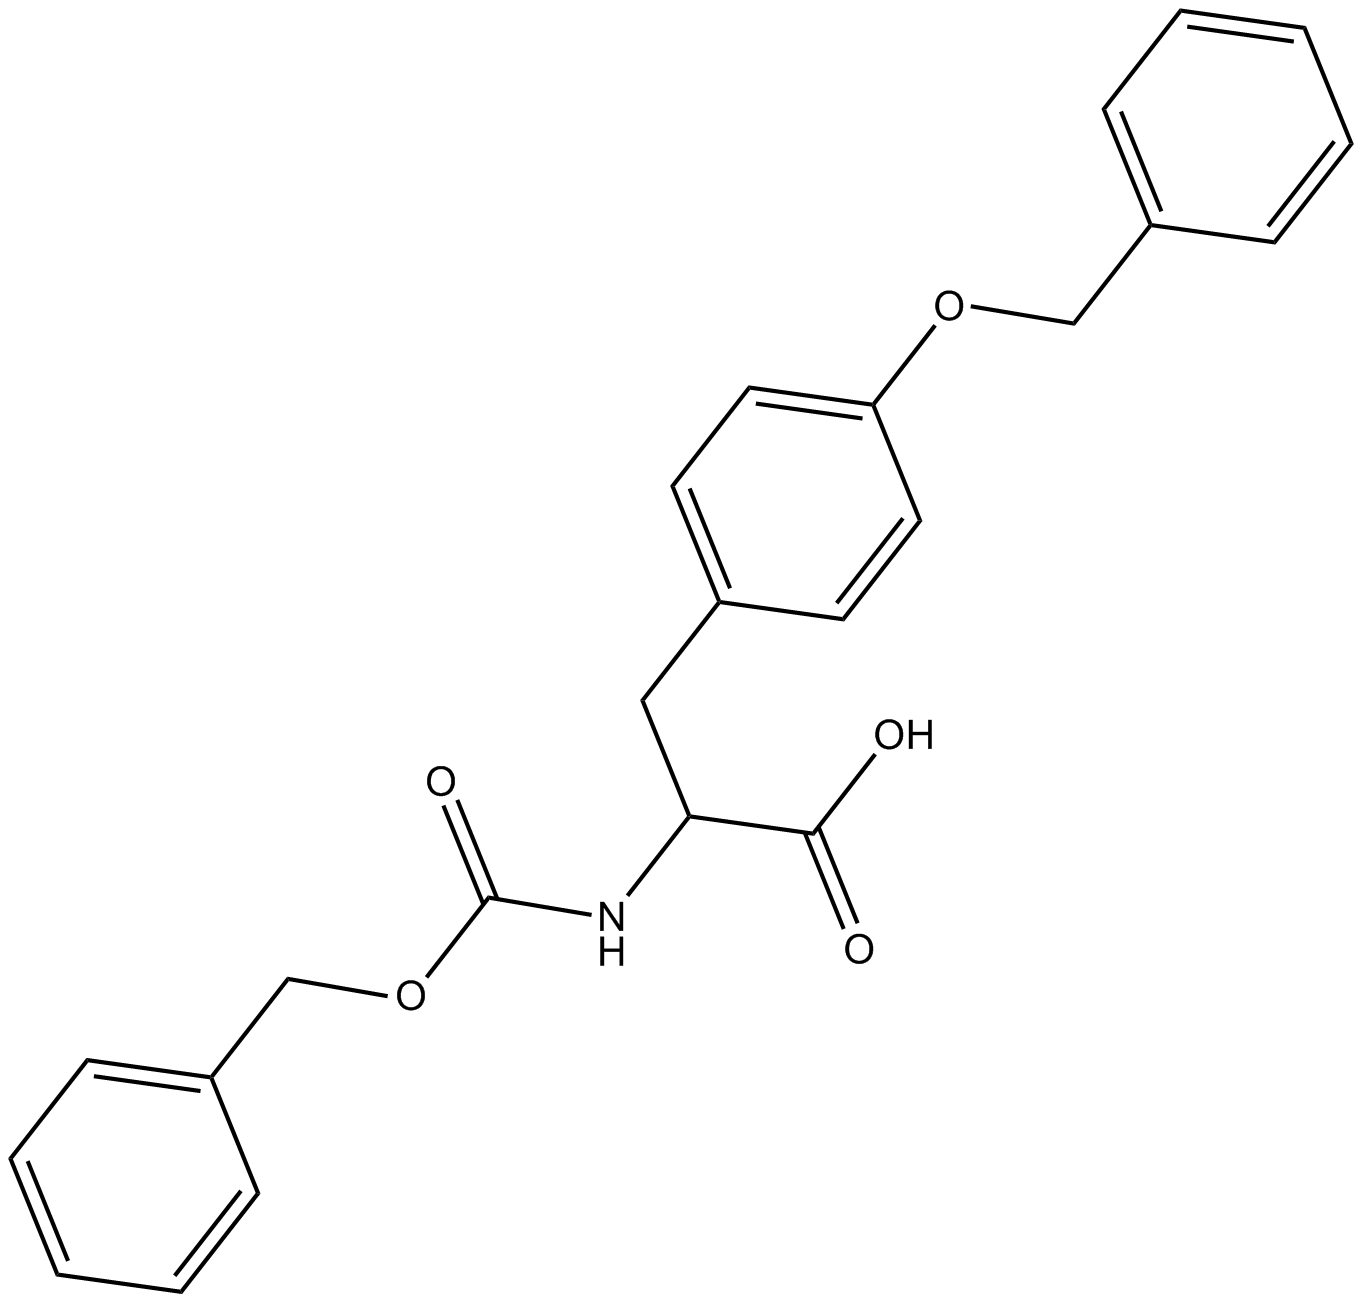 Z-Tyr(Bzl)-OH  Chemical Structure